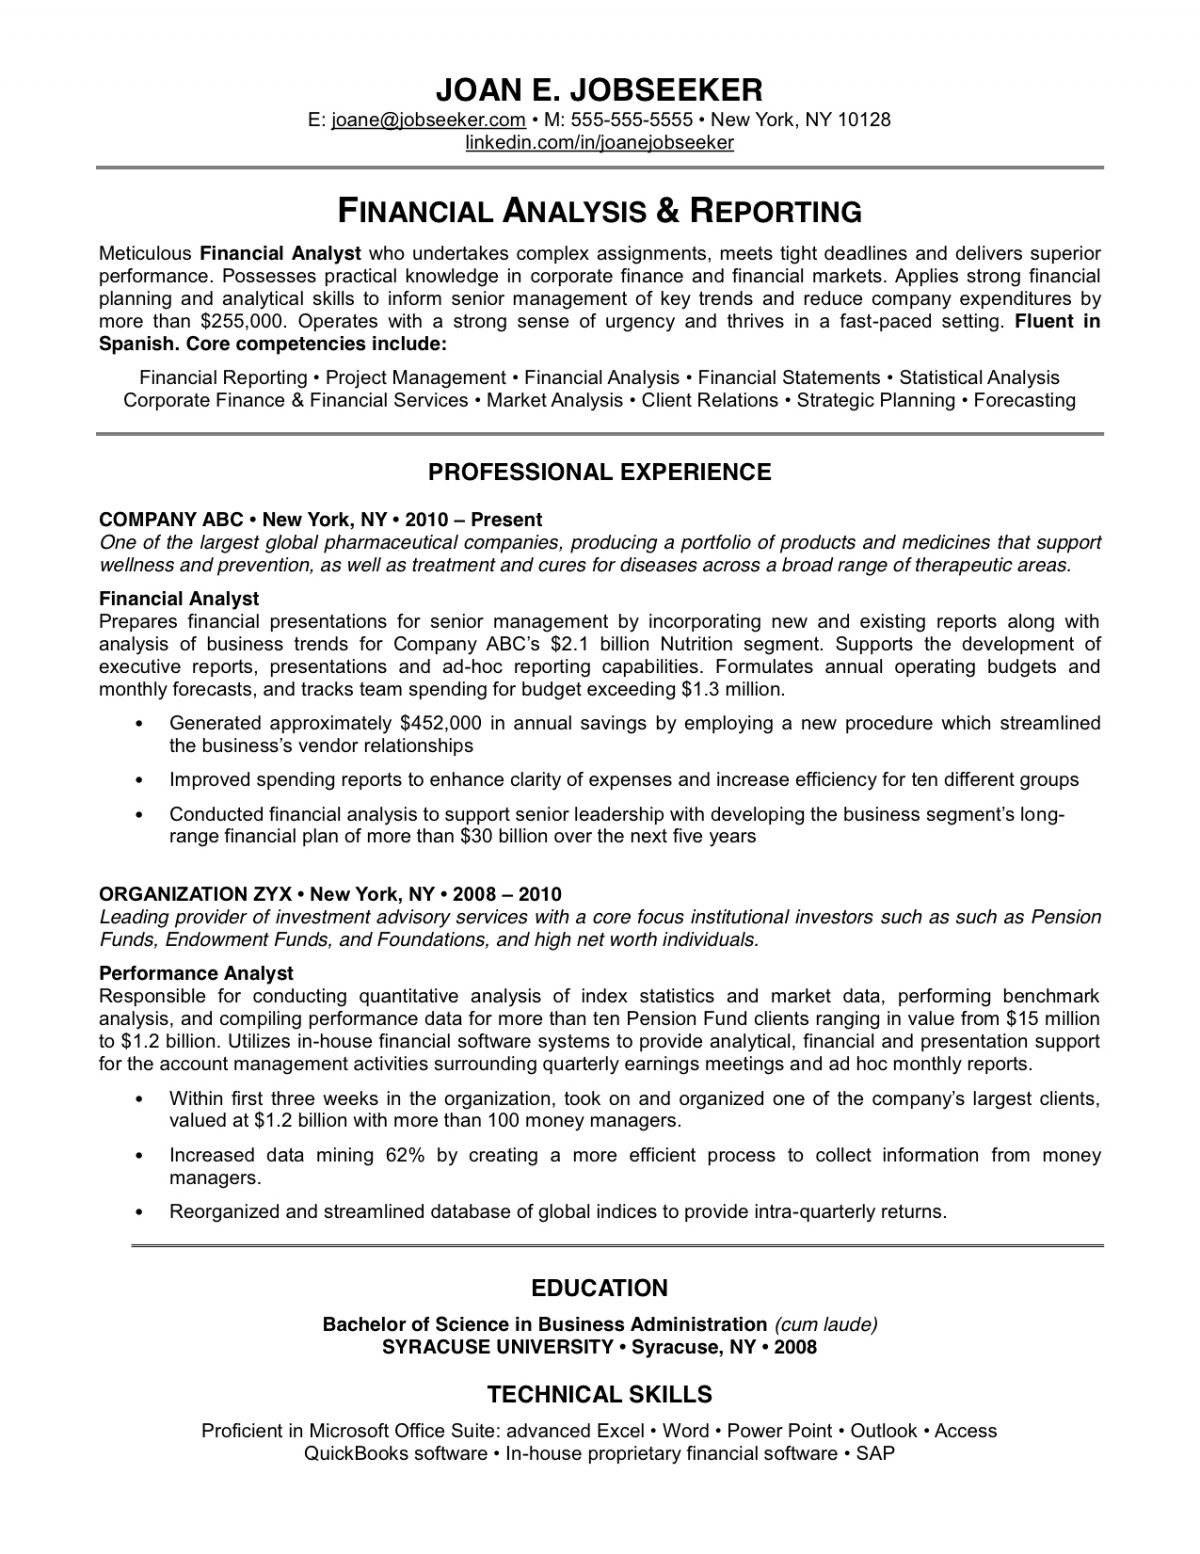 Example Of A Resume Image 19 example of a resume|wikiresume.com